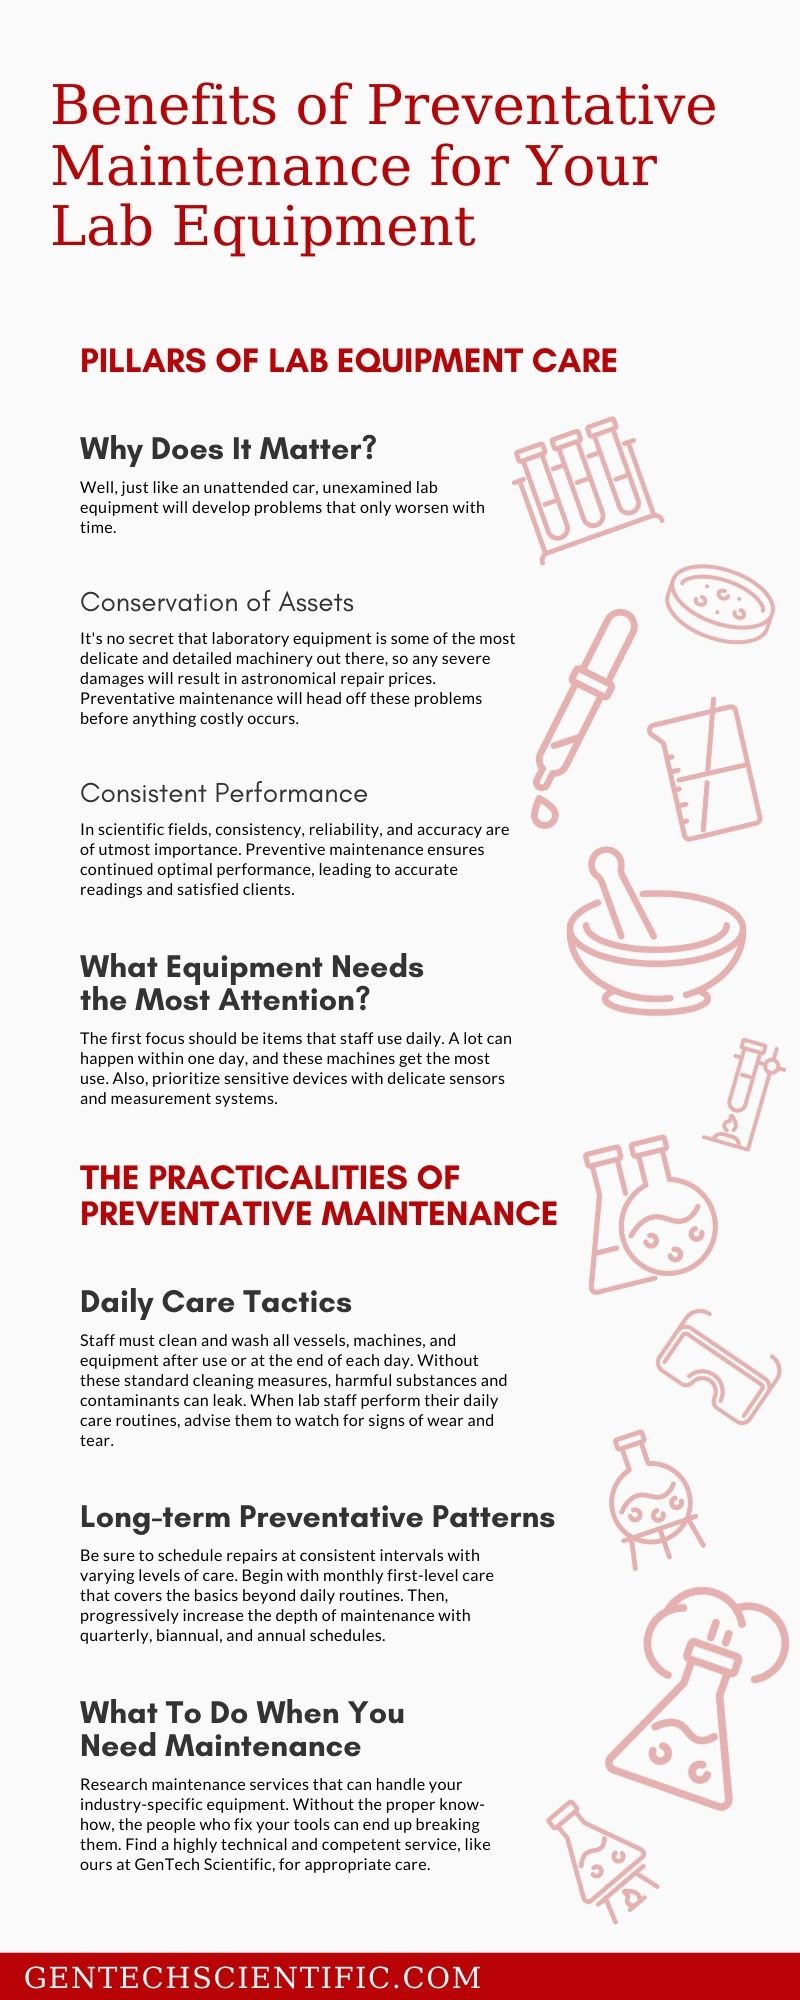 Benefits of Preventative Maintenance for Your Lab Equipment